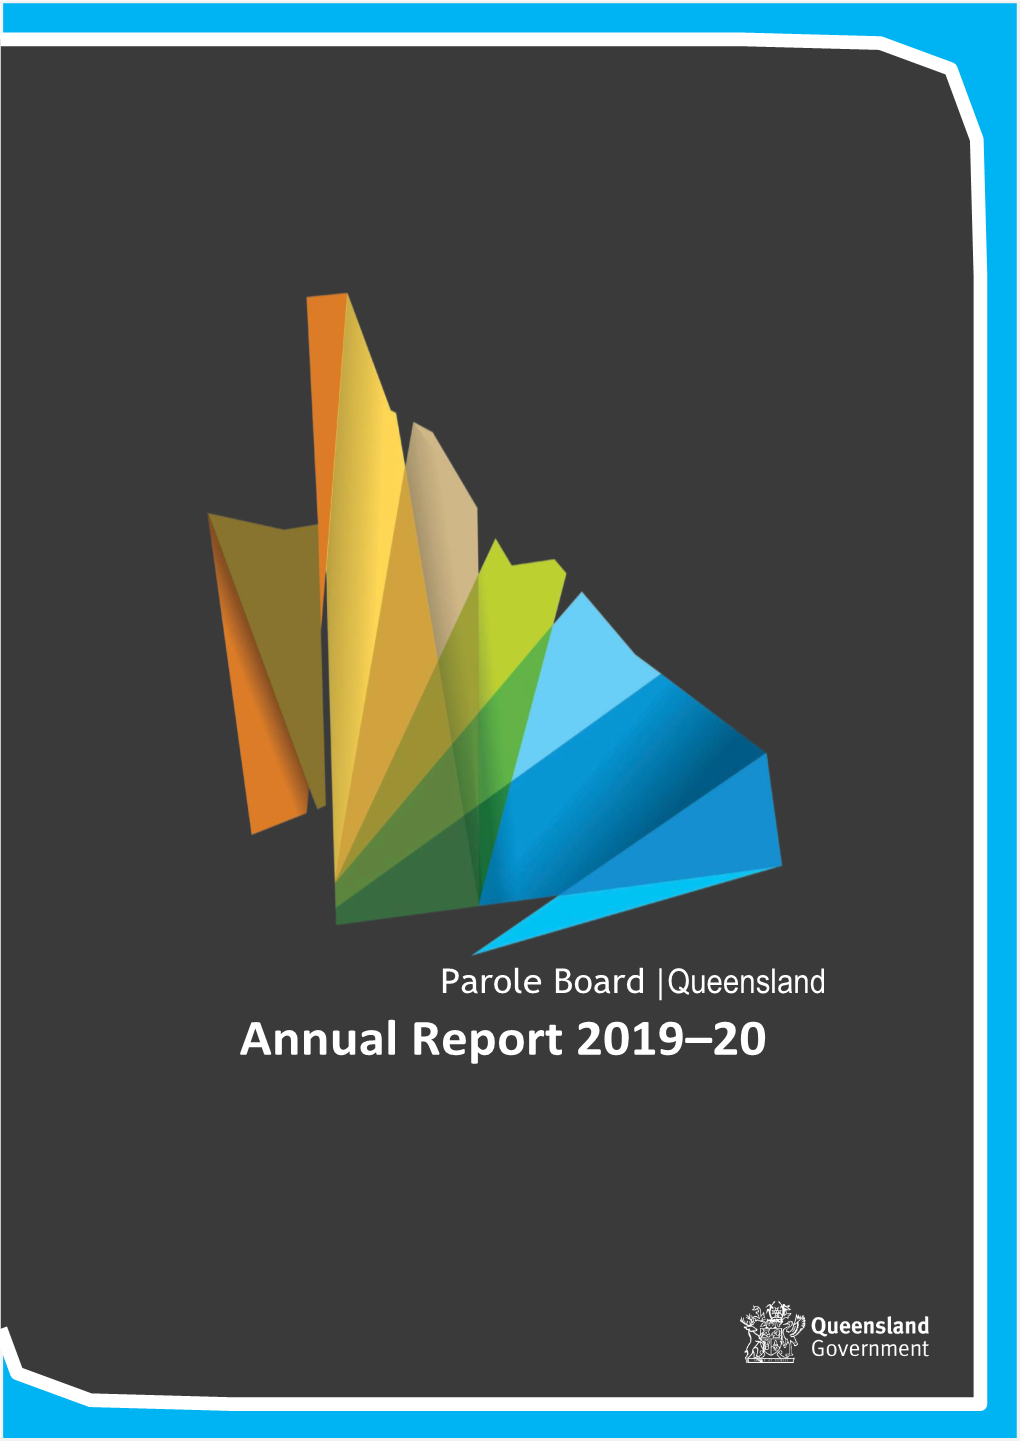 Parole Board Queensland Annual Report 2019–20, Detailing Its Operations and Activities